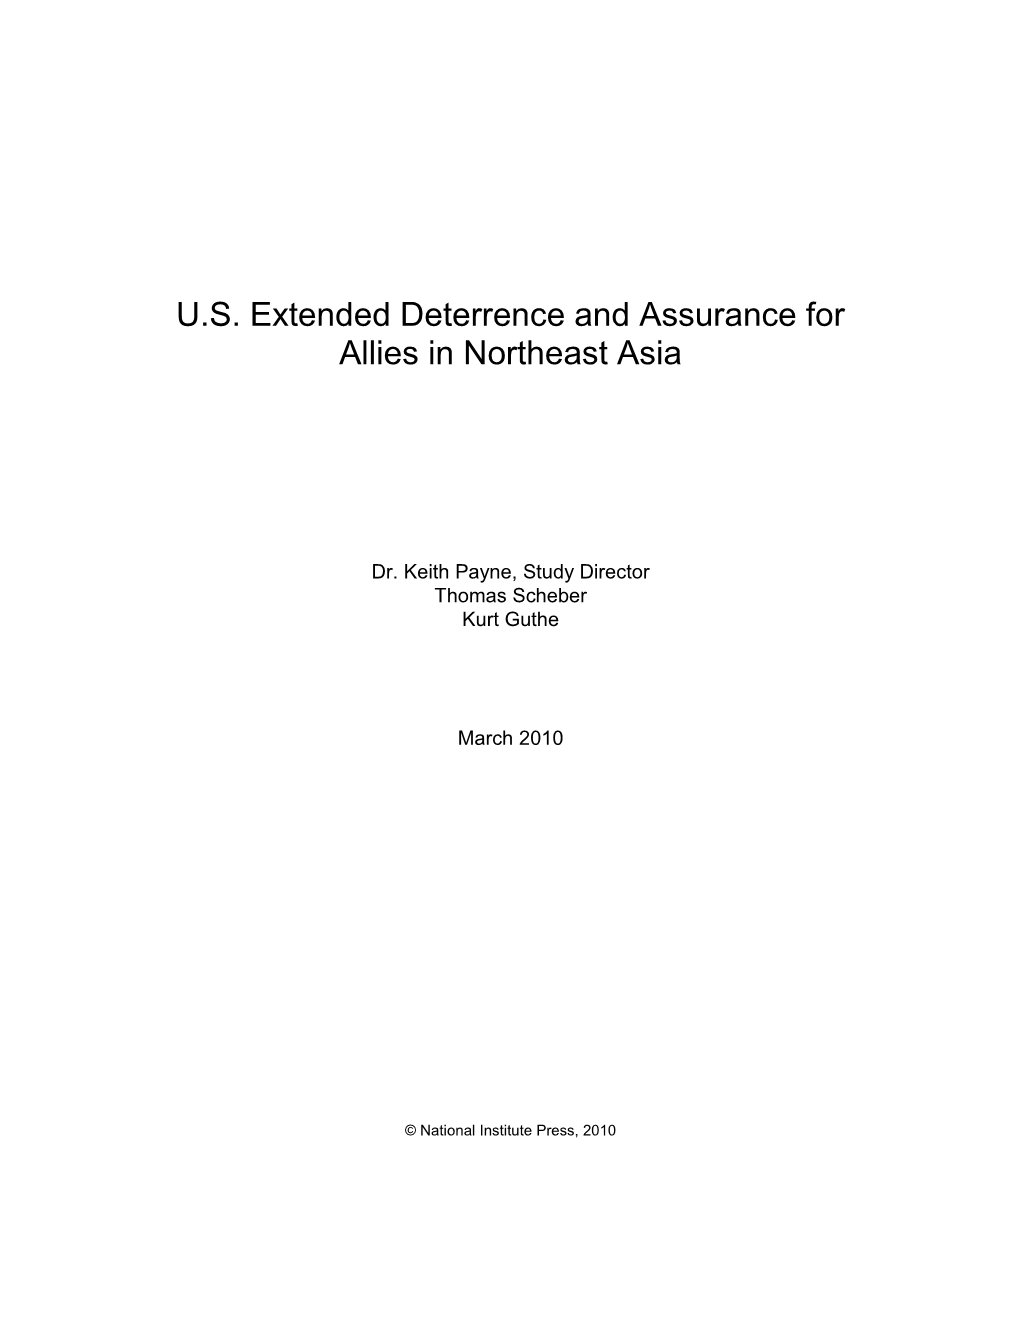 U.S. Extended Deterrence and Assurance for Allies in Northeast Asia